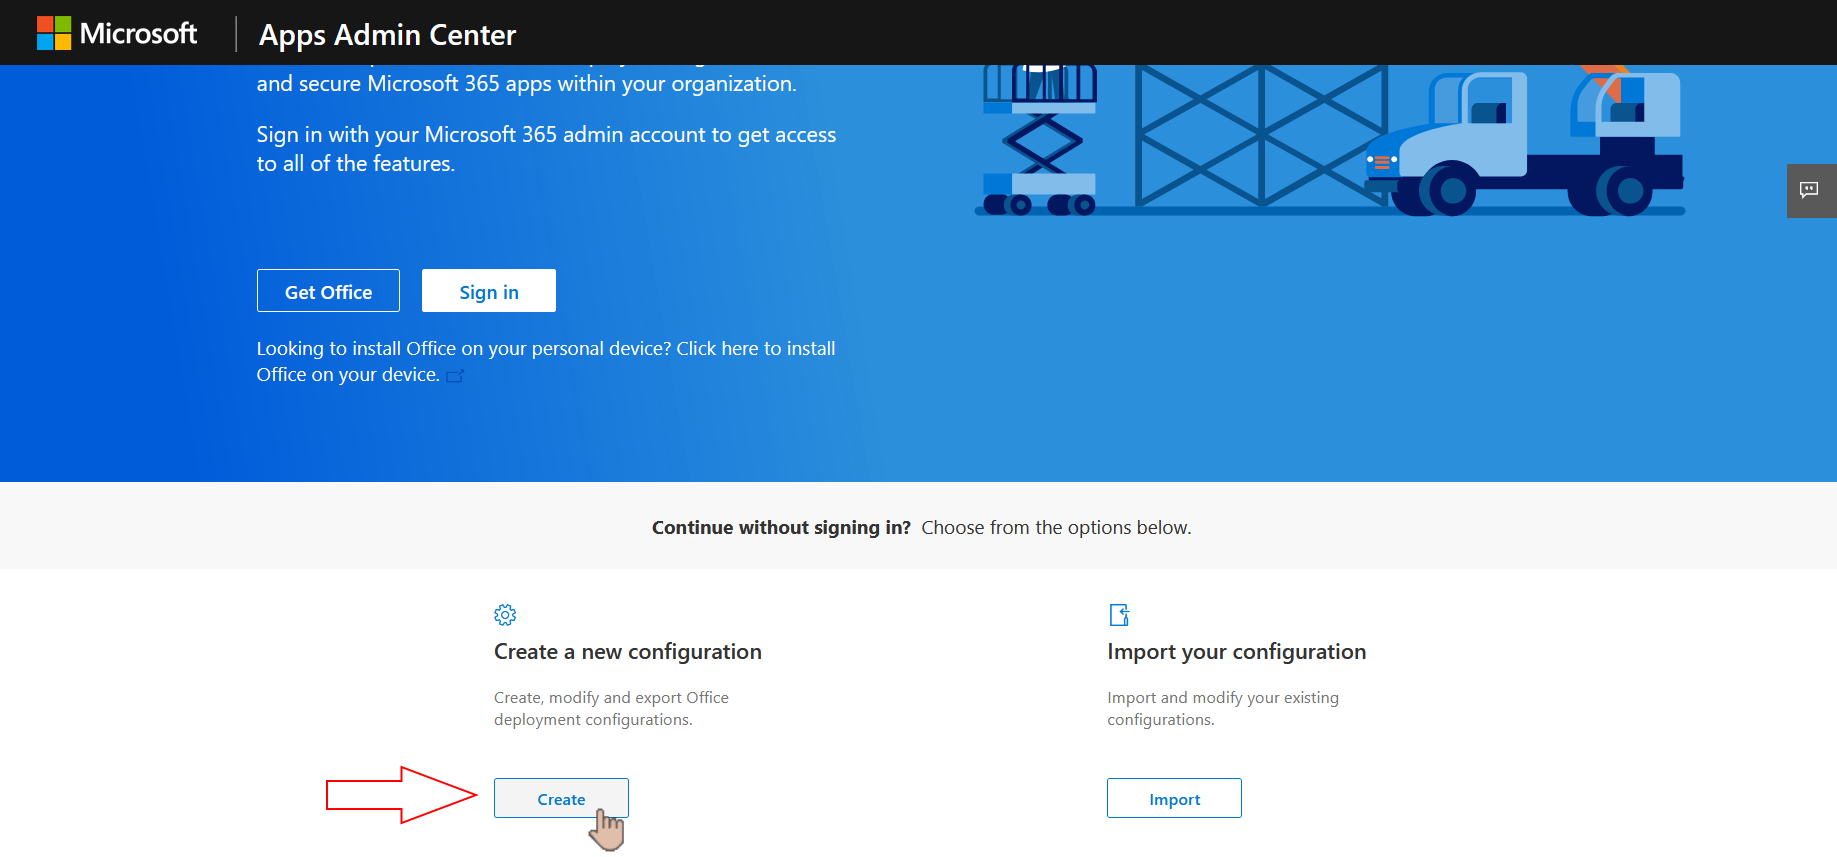 Creating new configuration in Office Customization Tool